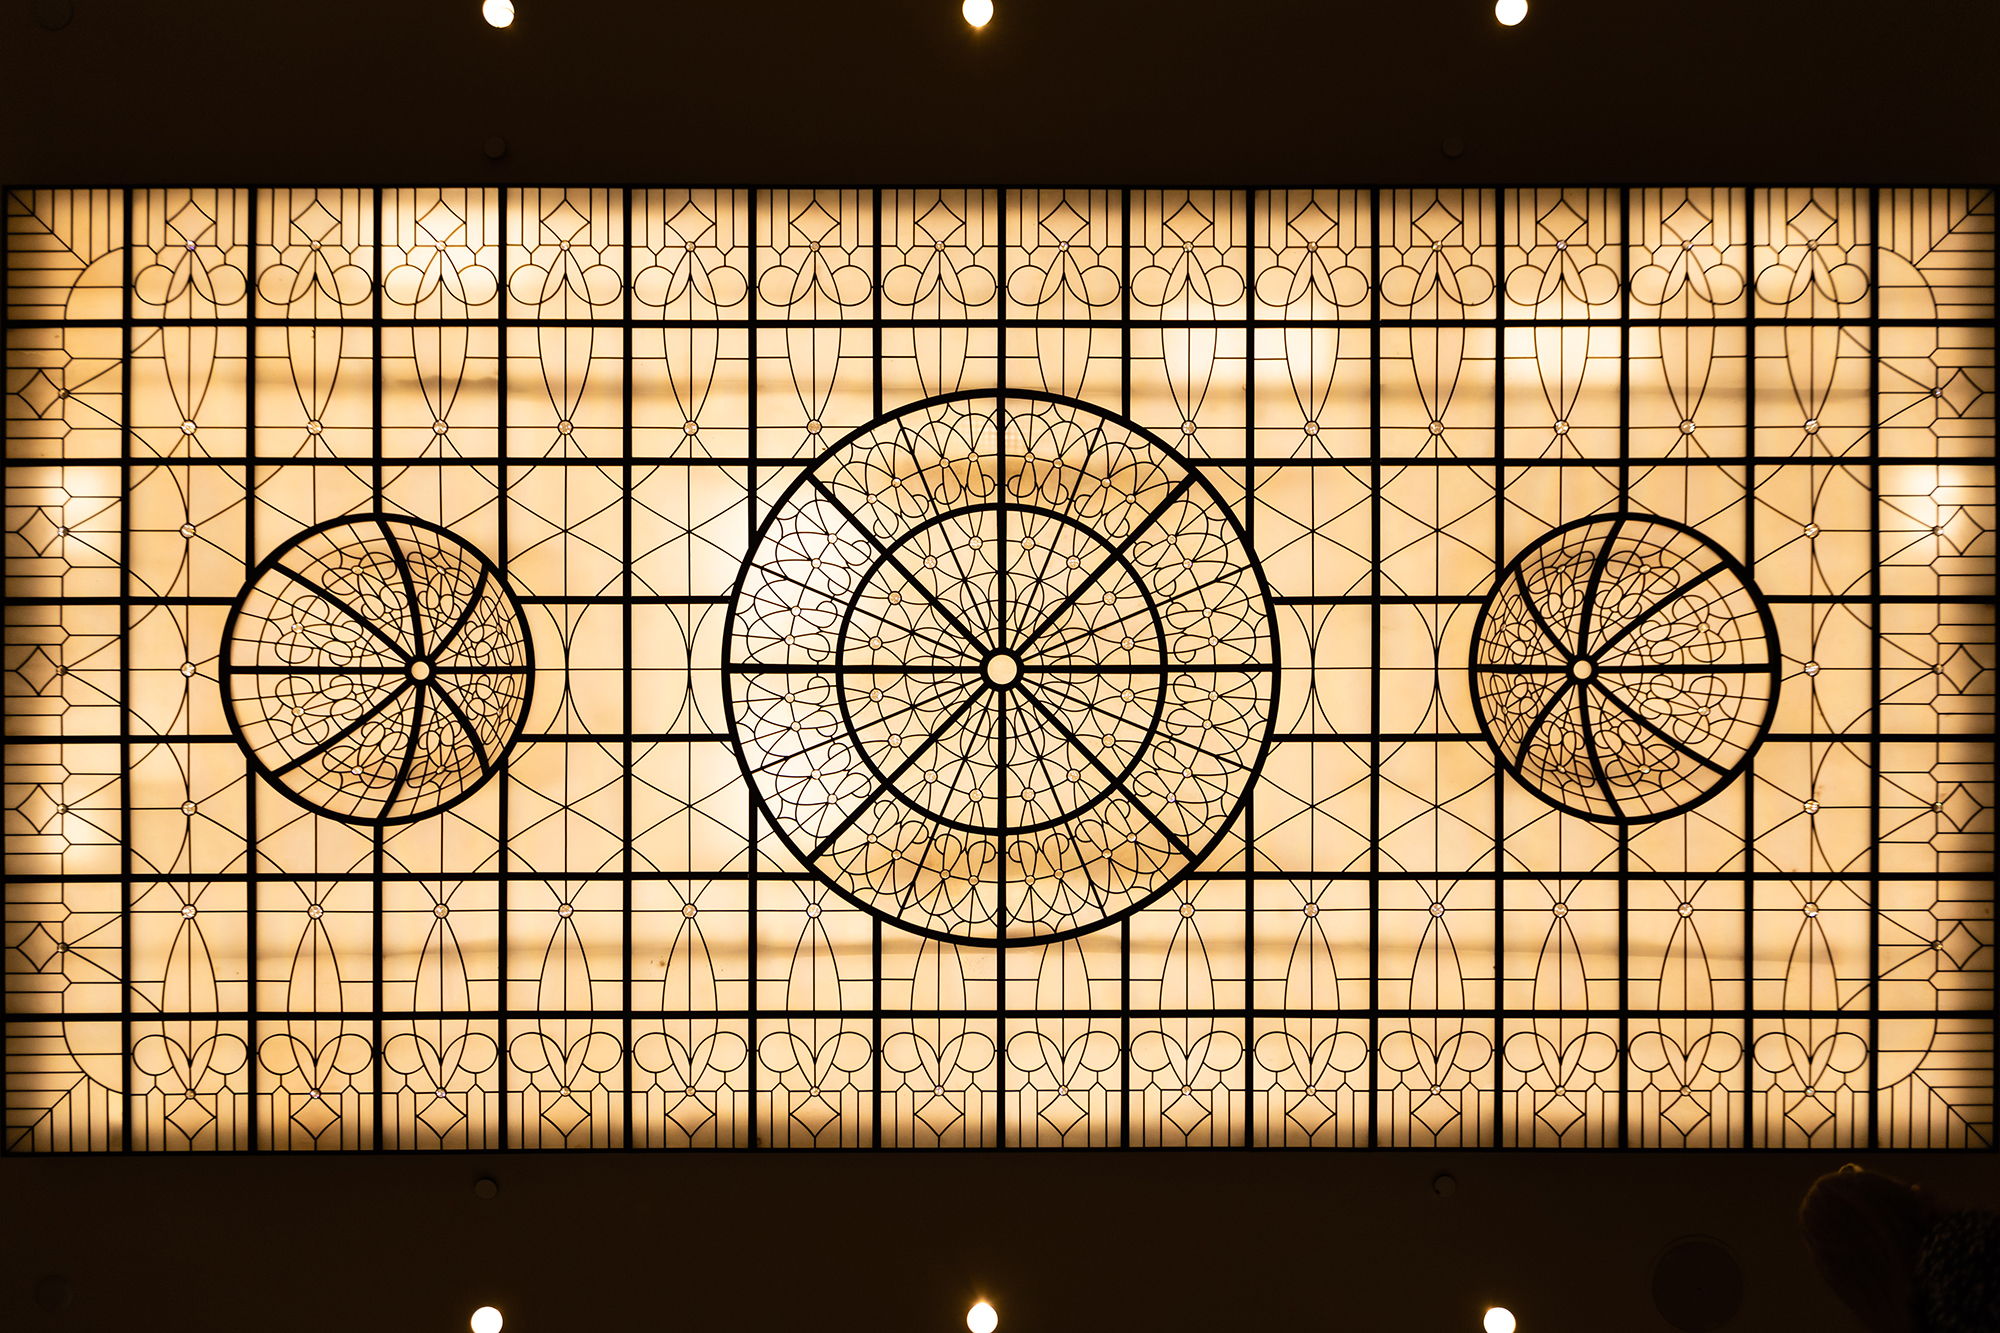 areal view of stained glass skylight. soft ambers and traditional leaded design. 3 arched domes within design